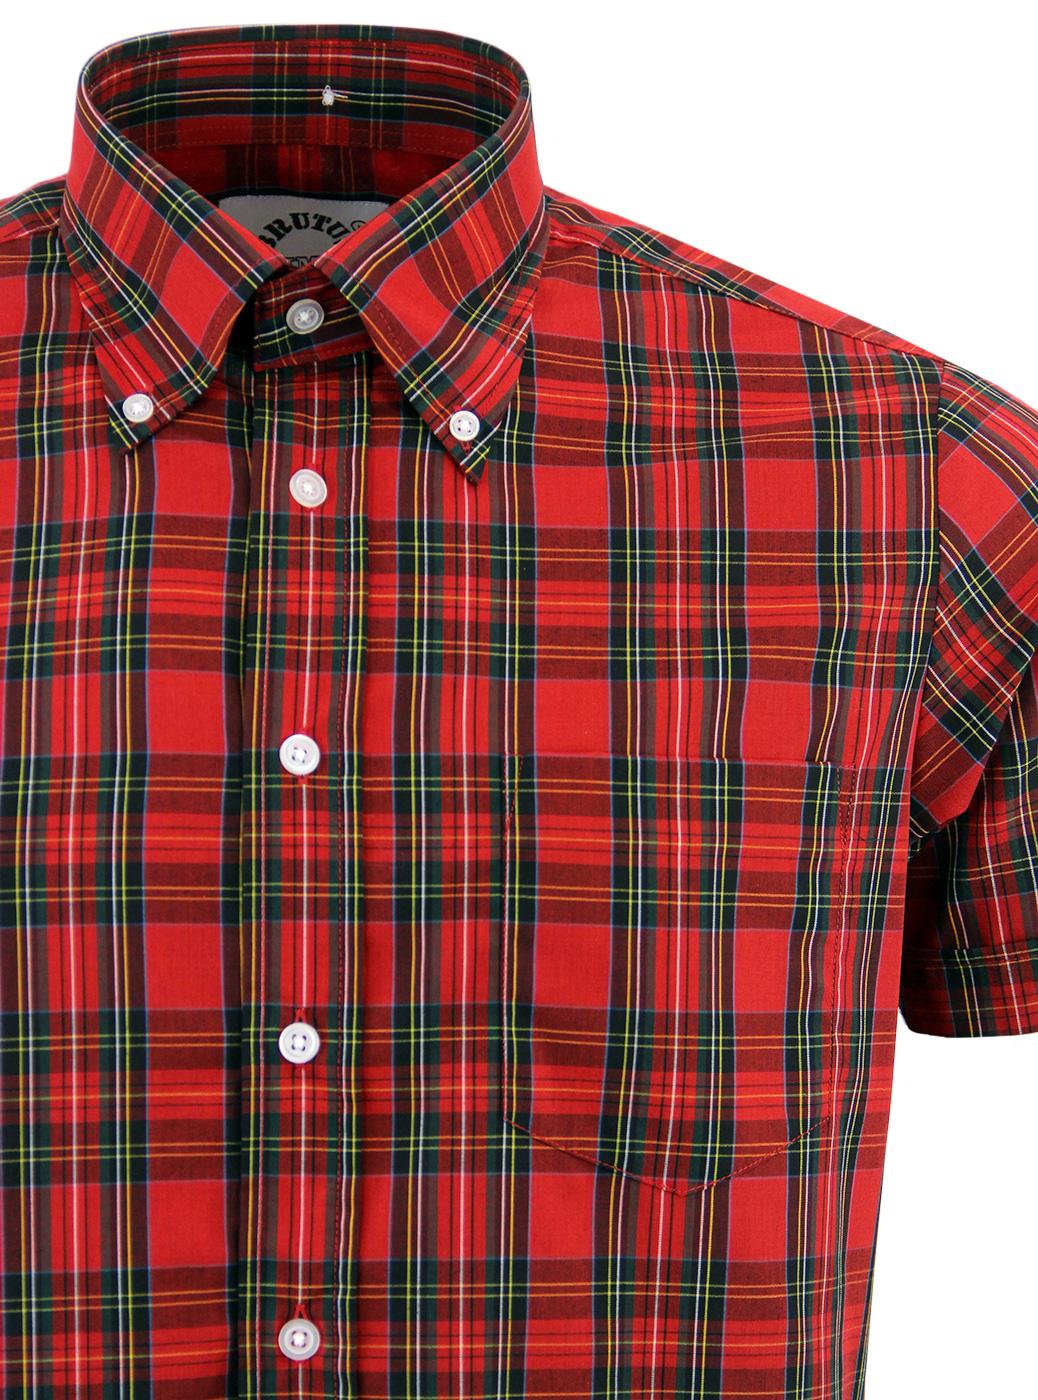 Brutus Trimfit Shirt in classic Red Check Mod 70s Shirt